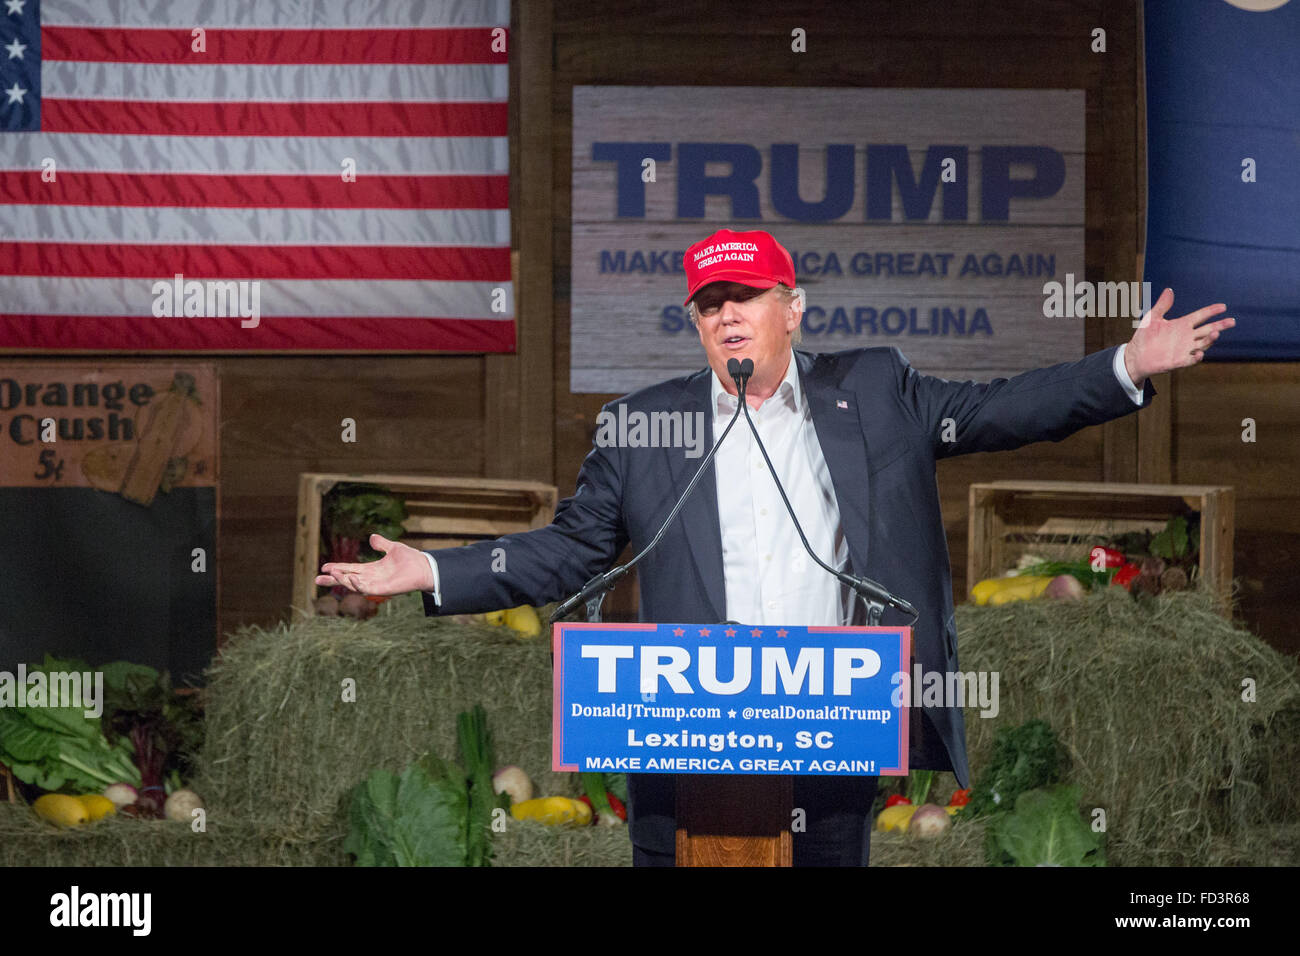 Lexington, South Carolina, USA. 27th January, 2016. Billionaire and GOP presidential candidate Donald Trump addresses supporters at a rally January 27, 2016 in Lexington, South Carolina. Stock Photo